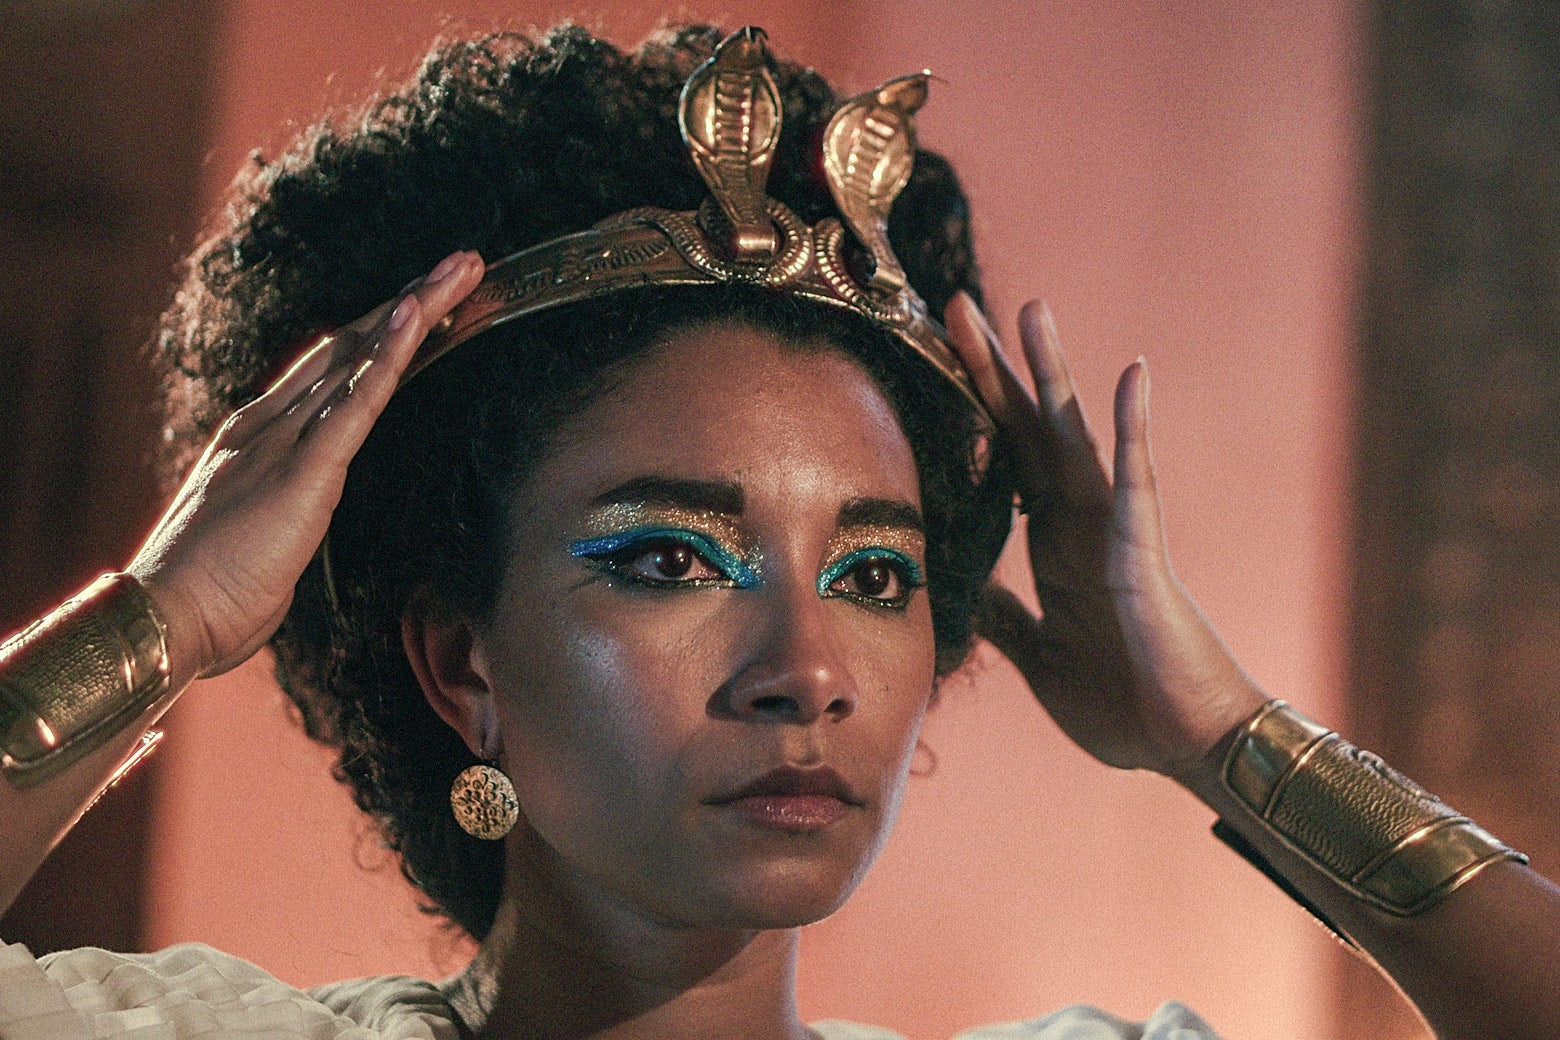 A still from the docuseries shows Adele James in a gold crown and eyeliner as Cleopatra.